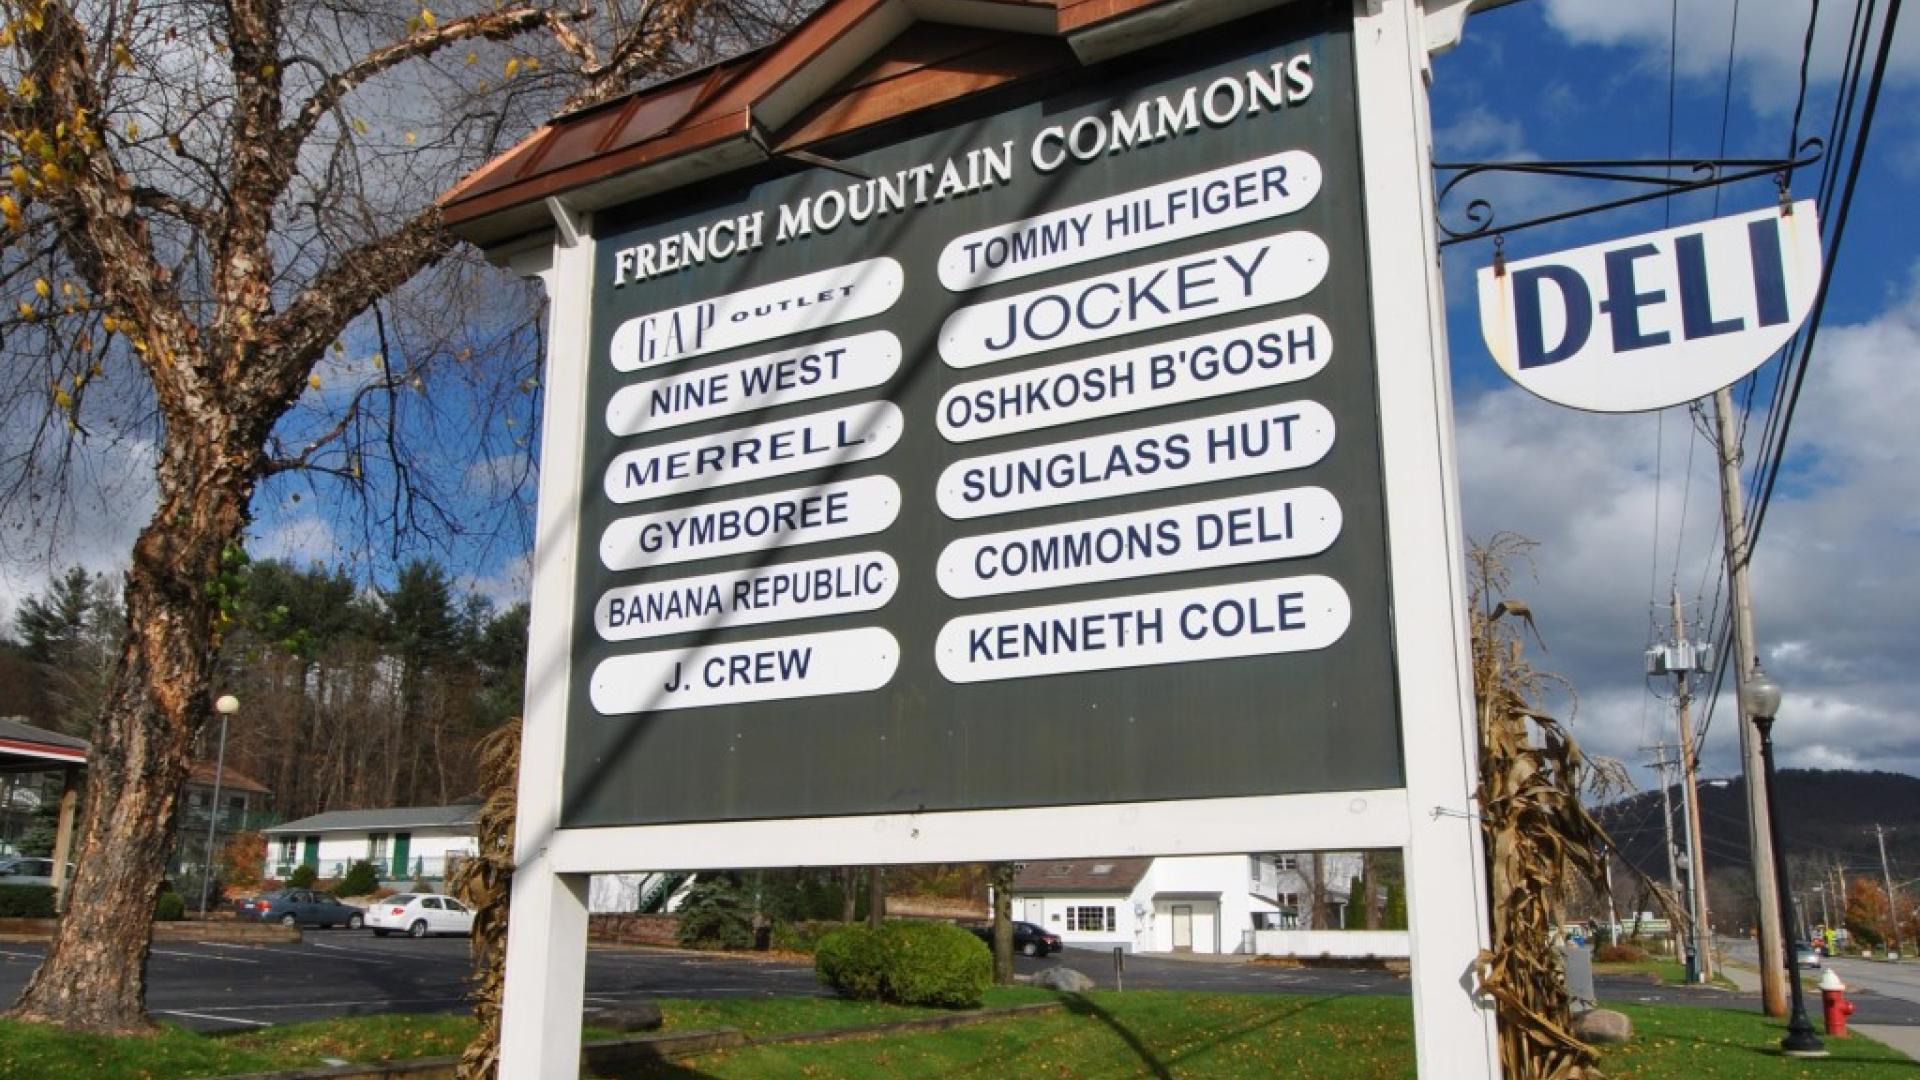 French Mountain Commons